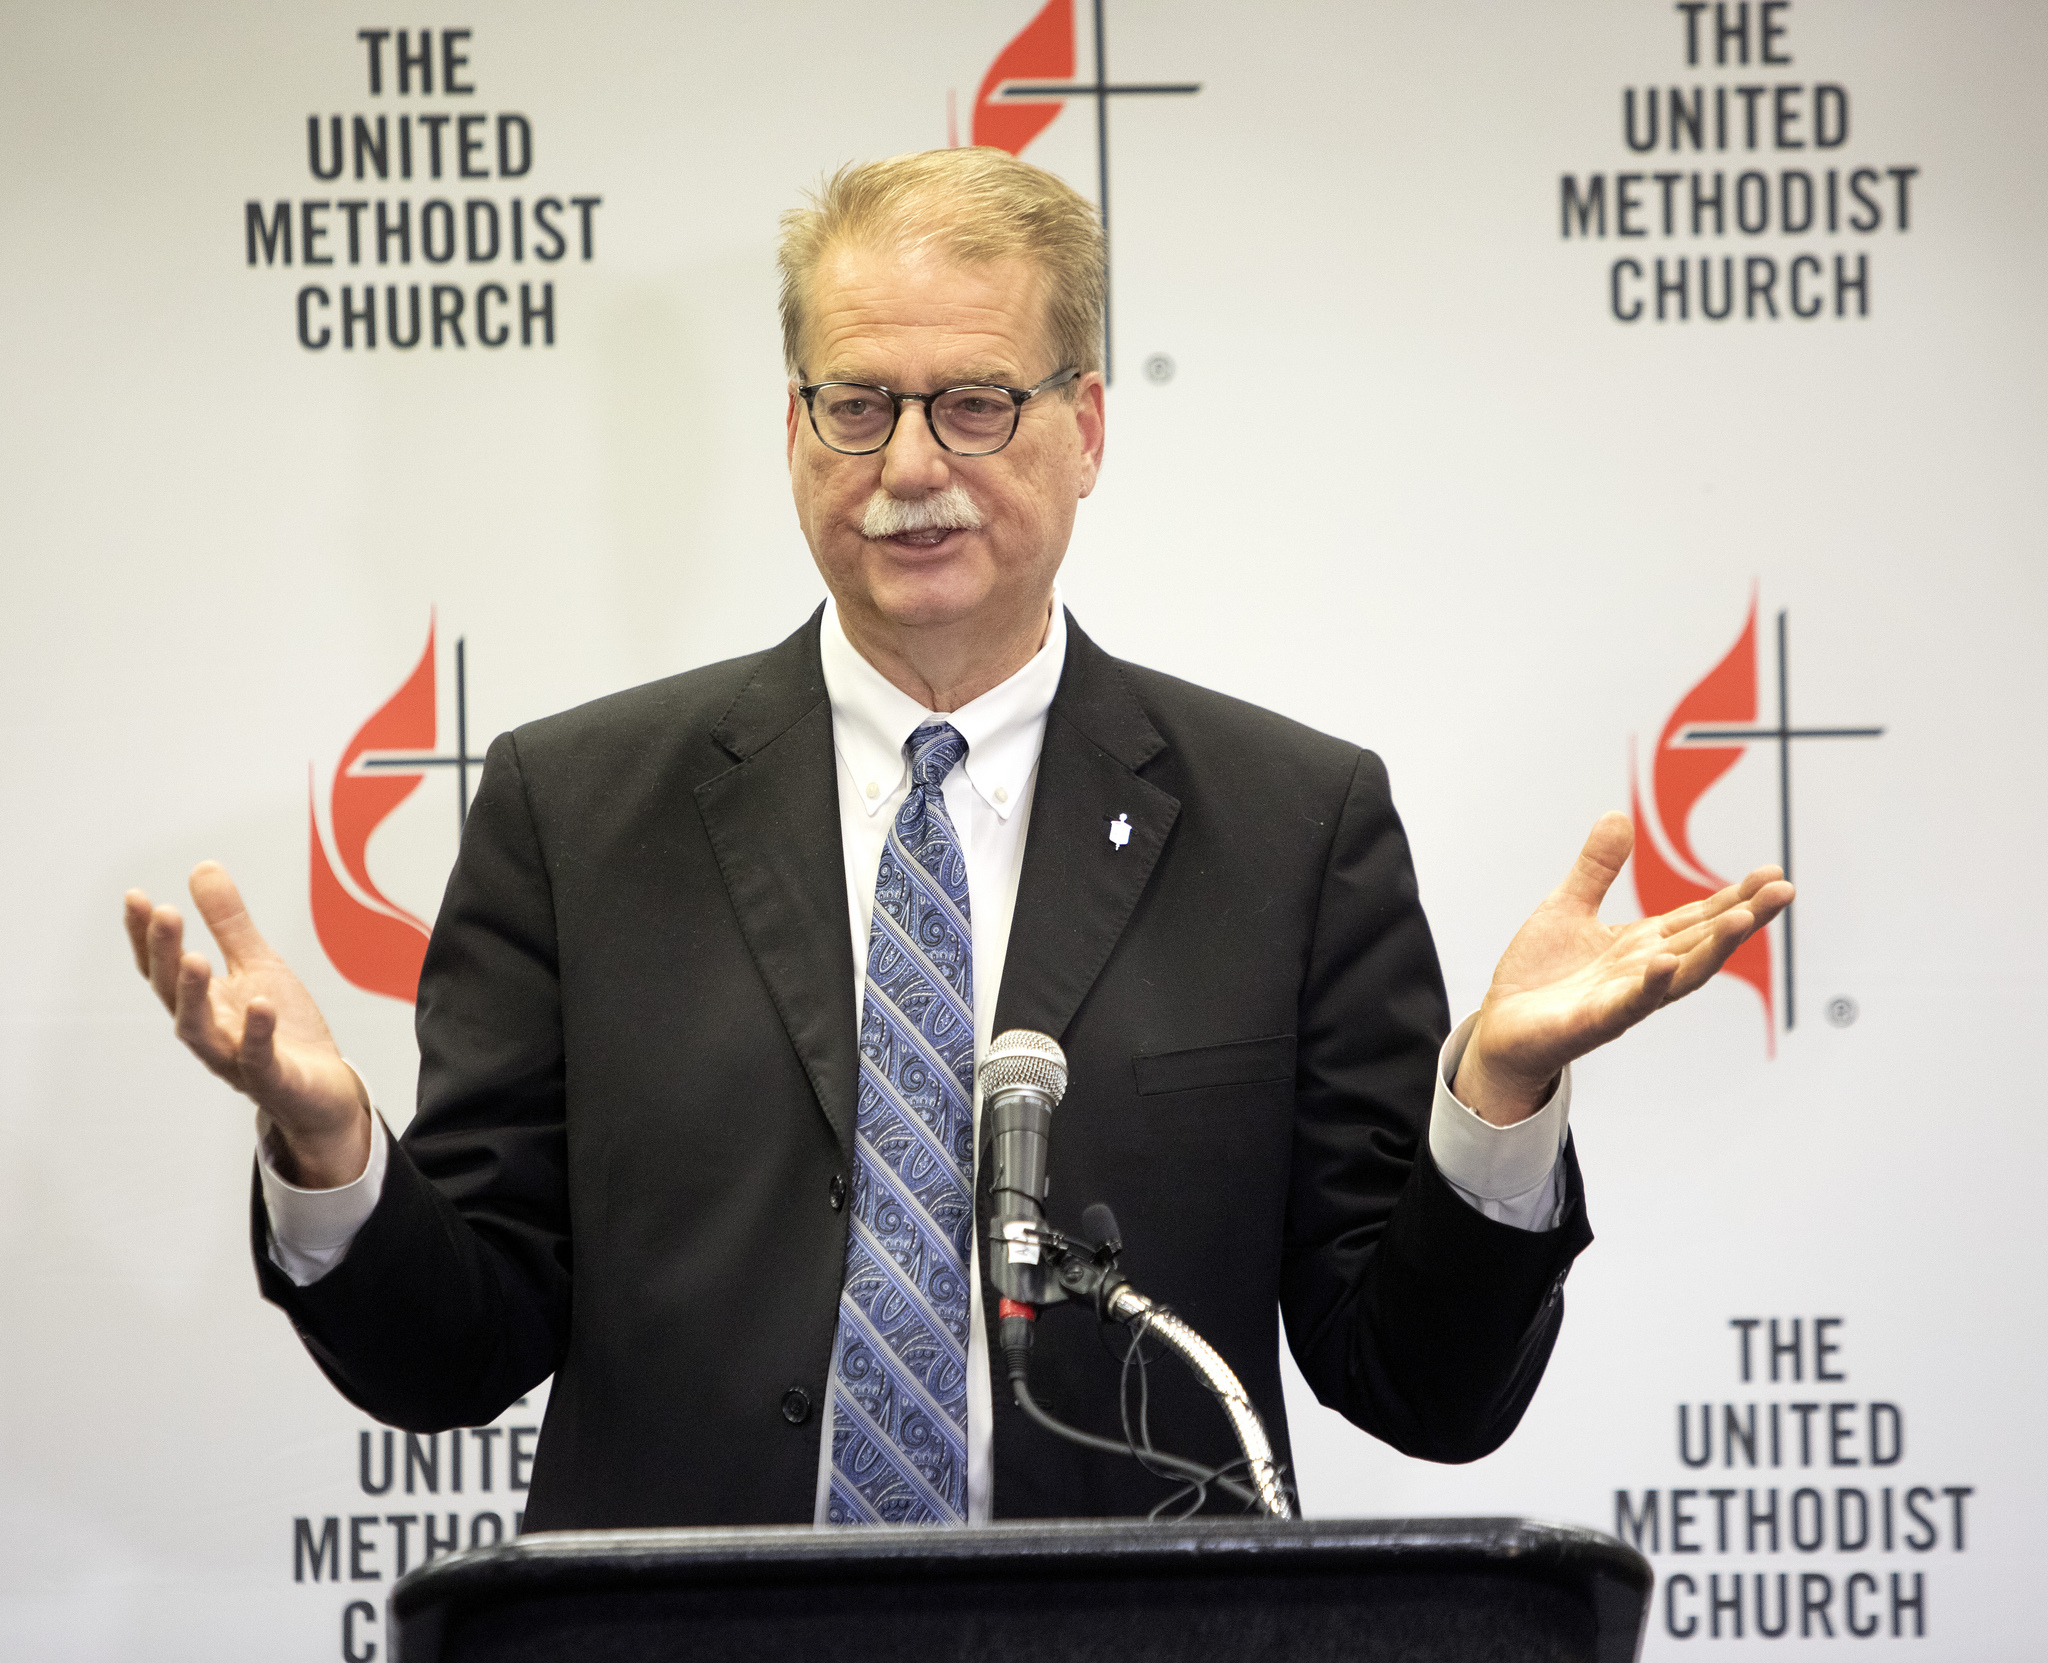 Bishop Kenneth H. Carter, president of the Council of Bishops, speaks to the press following the conclusion of the 2019 United Methodist General Conference in St. Louis. Photo by Kathleen Barry, UMNS.